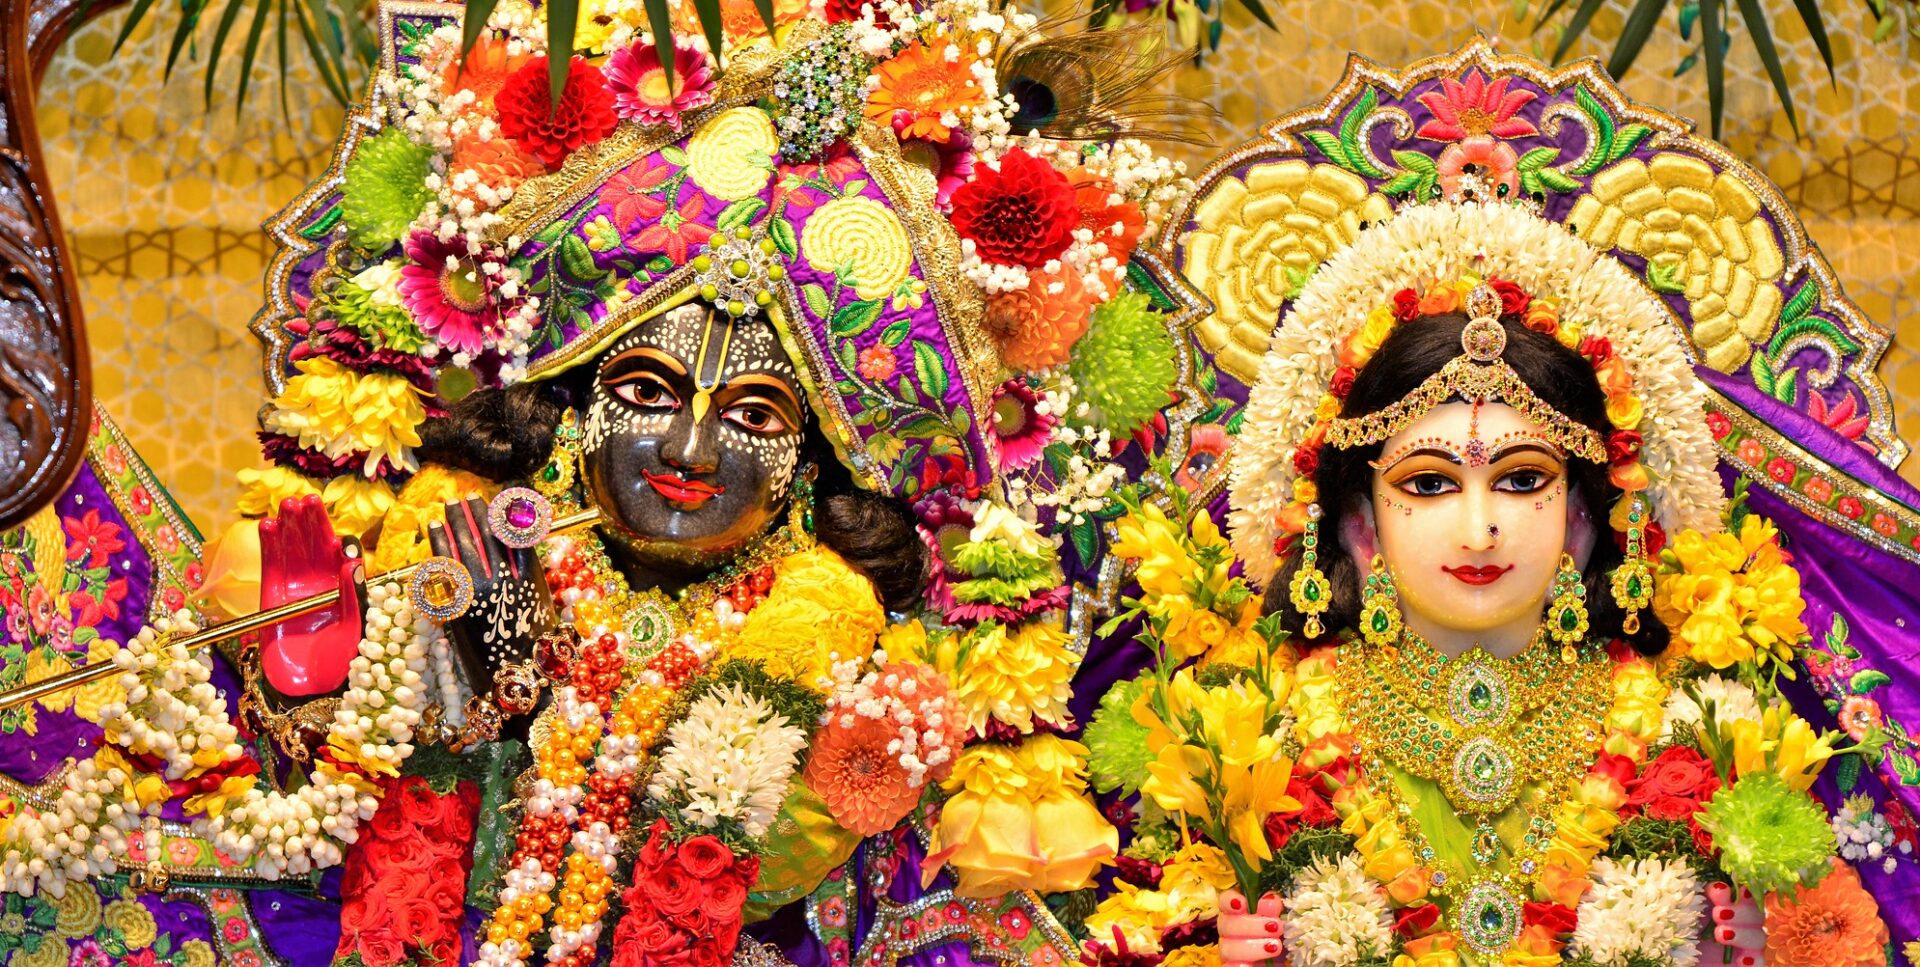 Bhakti for Dummies: What You Need to Know About The Hare Krishnas